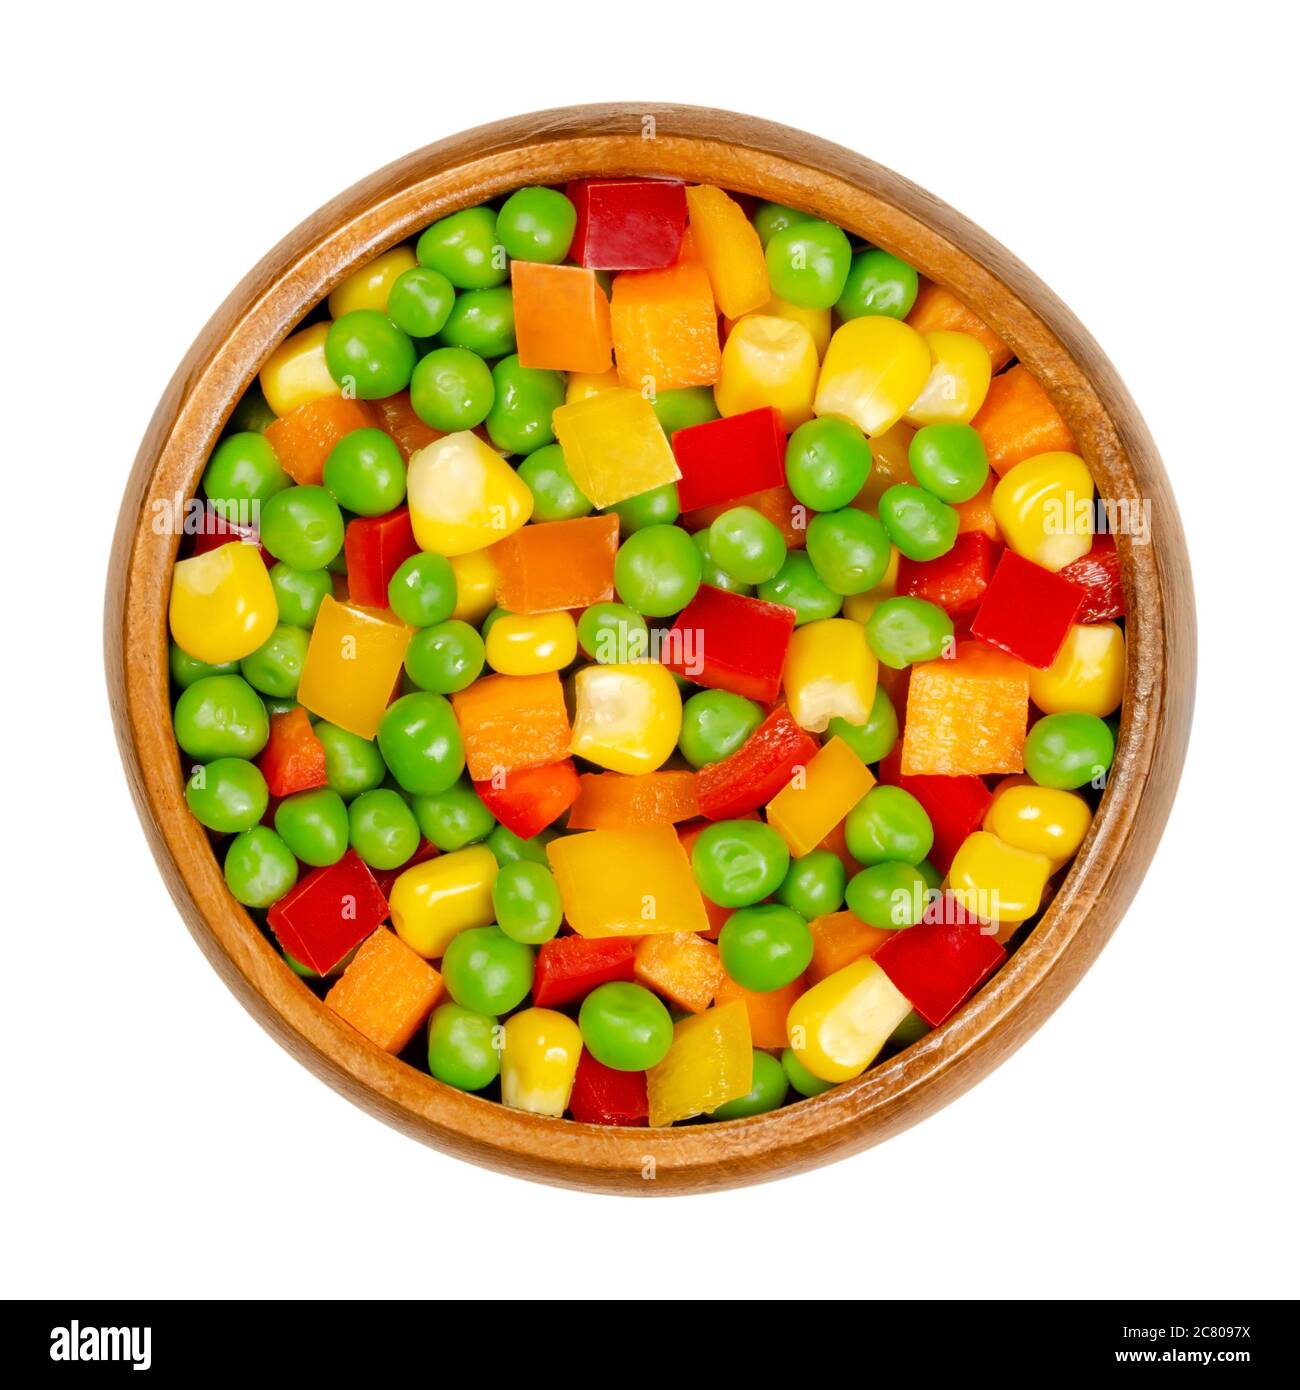 Mixed vegetables in a wooden bowl. Colorful veggie mix of green peas, corn, carrot cubes and diced bell peppers.  Organic and vegan. Closeup. Stock Photo